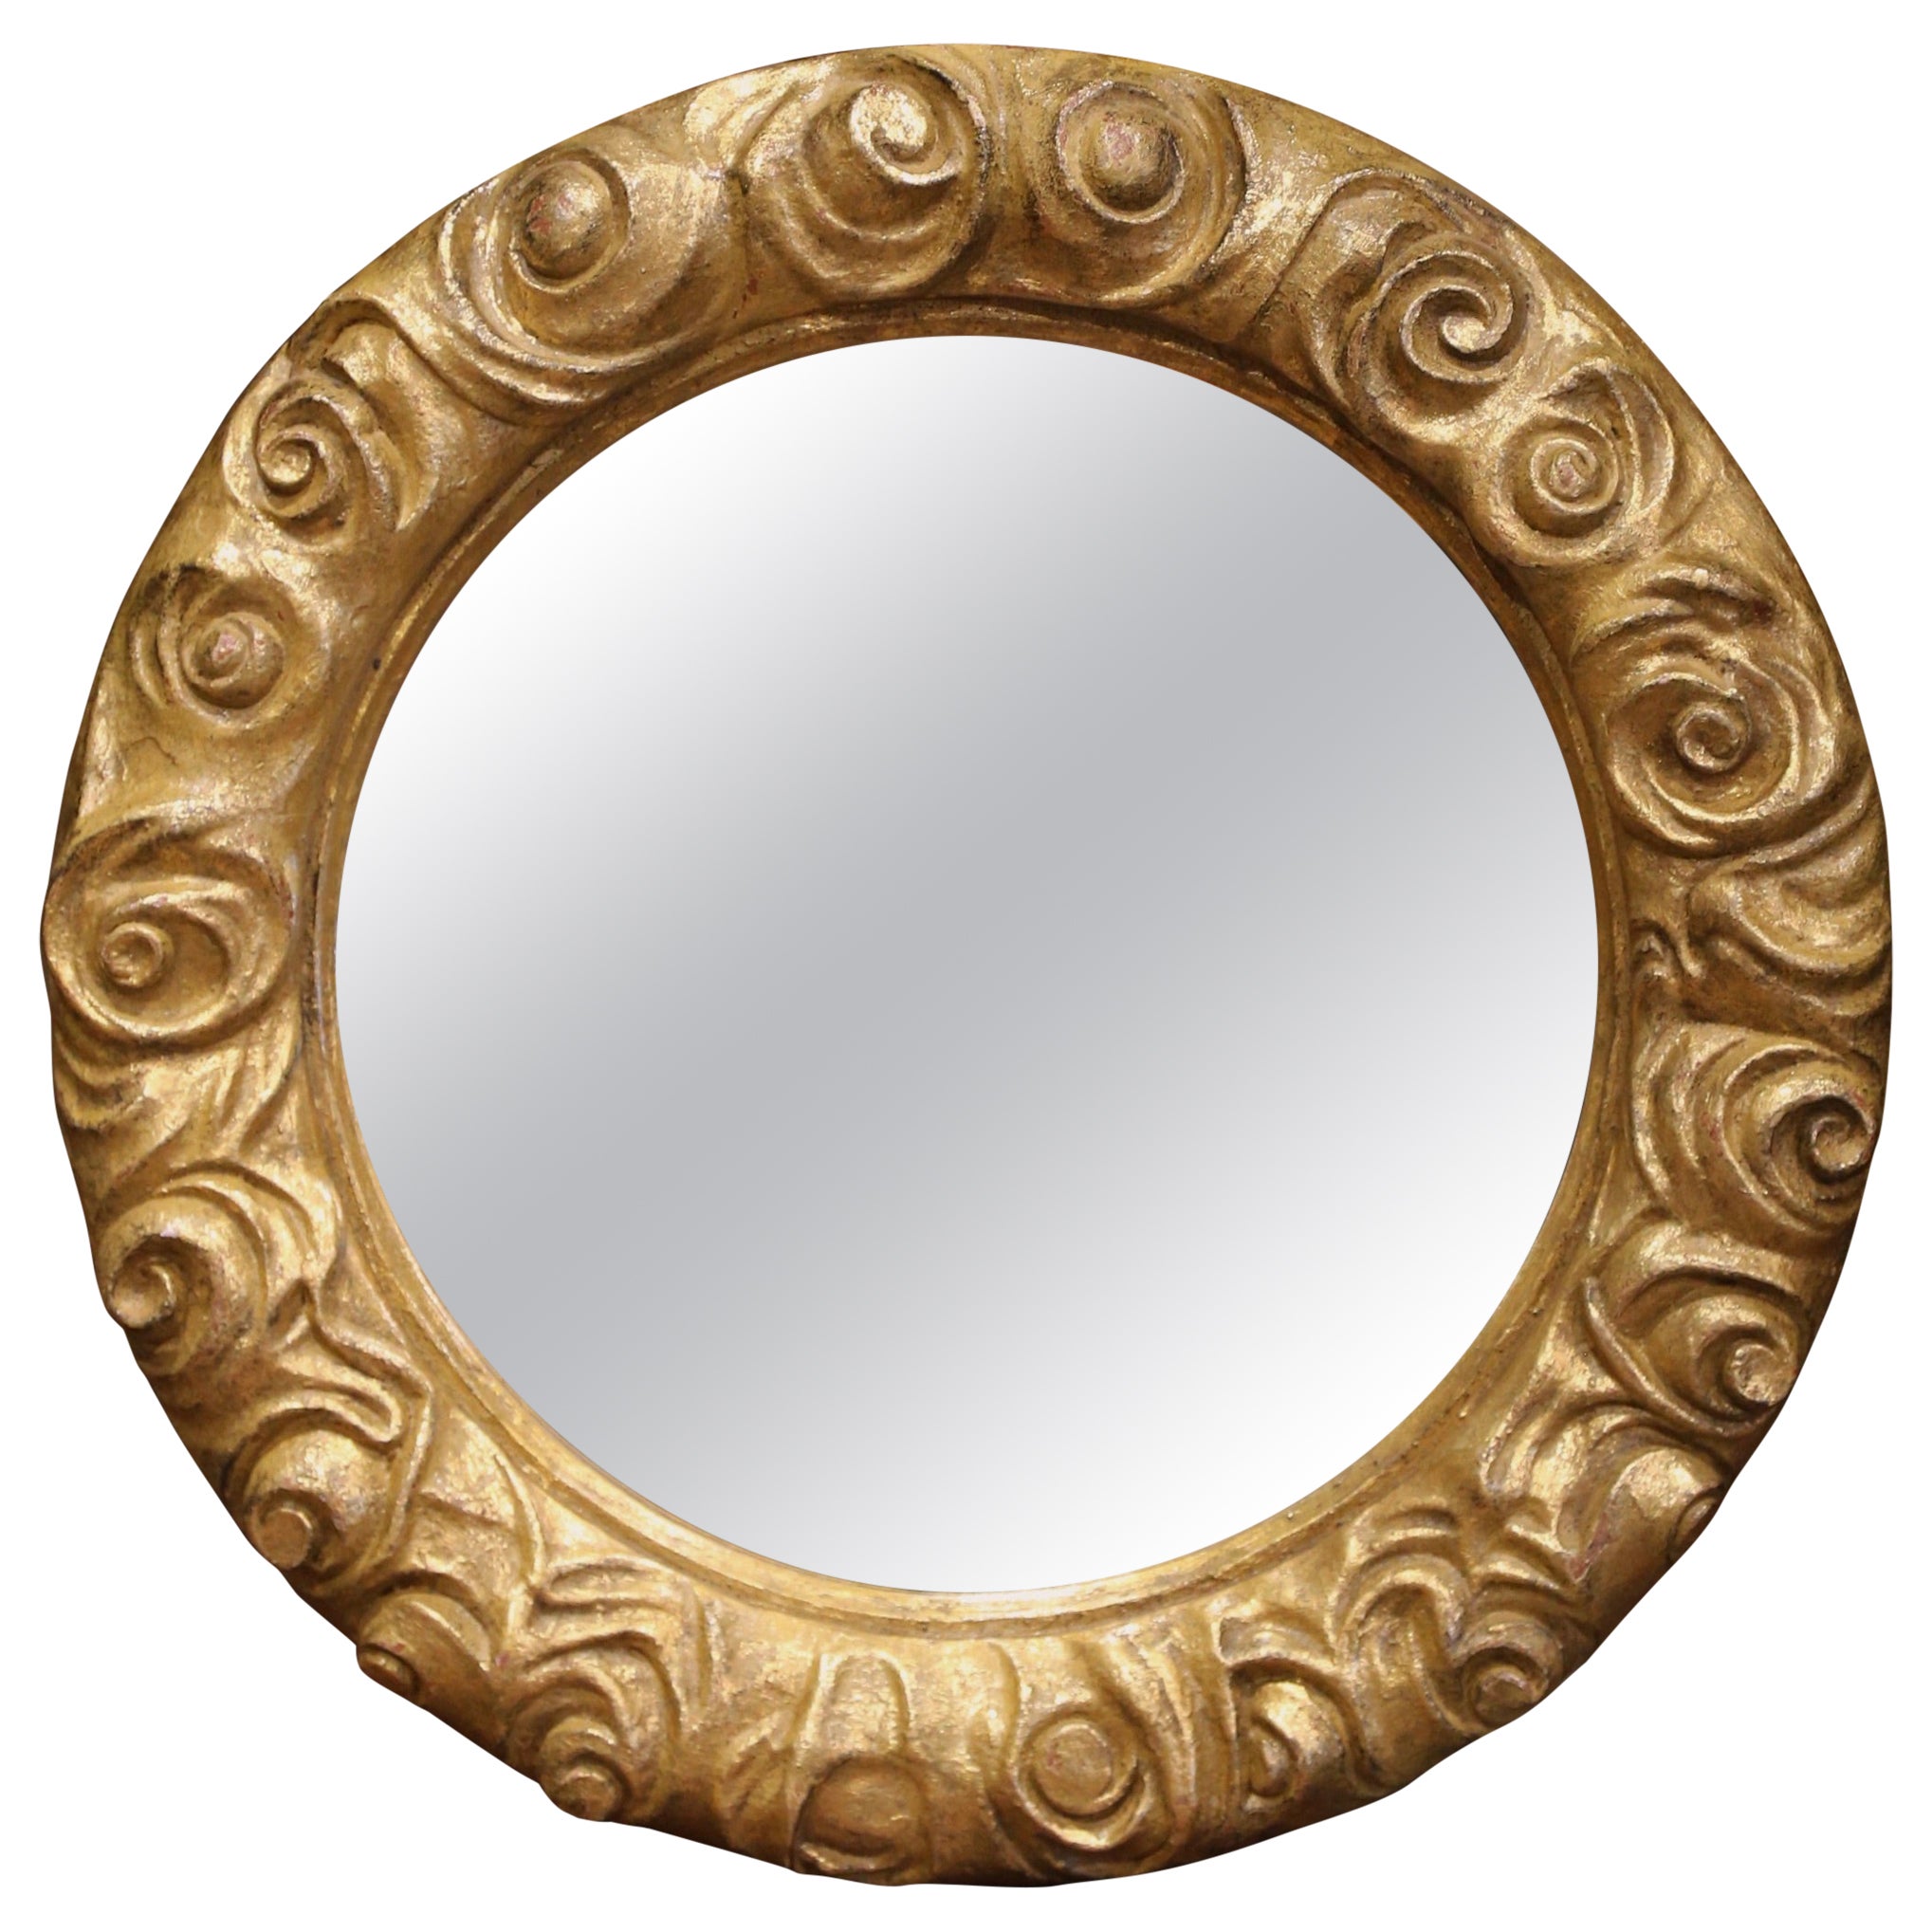 Mid-20th Century French Carved Gilt Wood Round Mirror with Floral Motifs